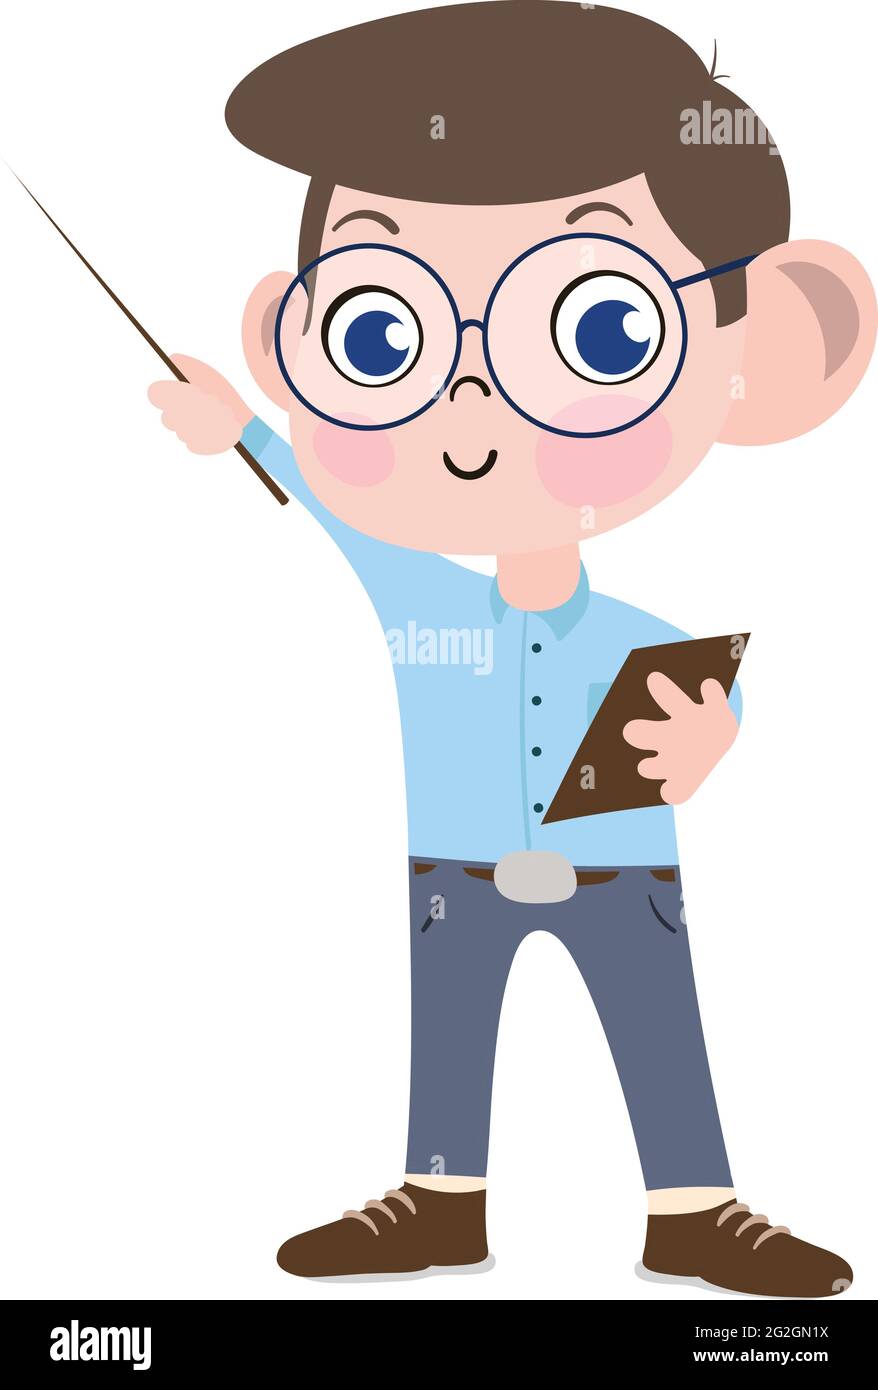 A Cute and Adorable Child Character in Cartoon Style. Kindergarten Preschool kid Dressed as college professor. Small Kid pointing towards blackboard. Stock Vector